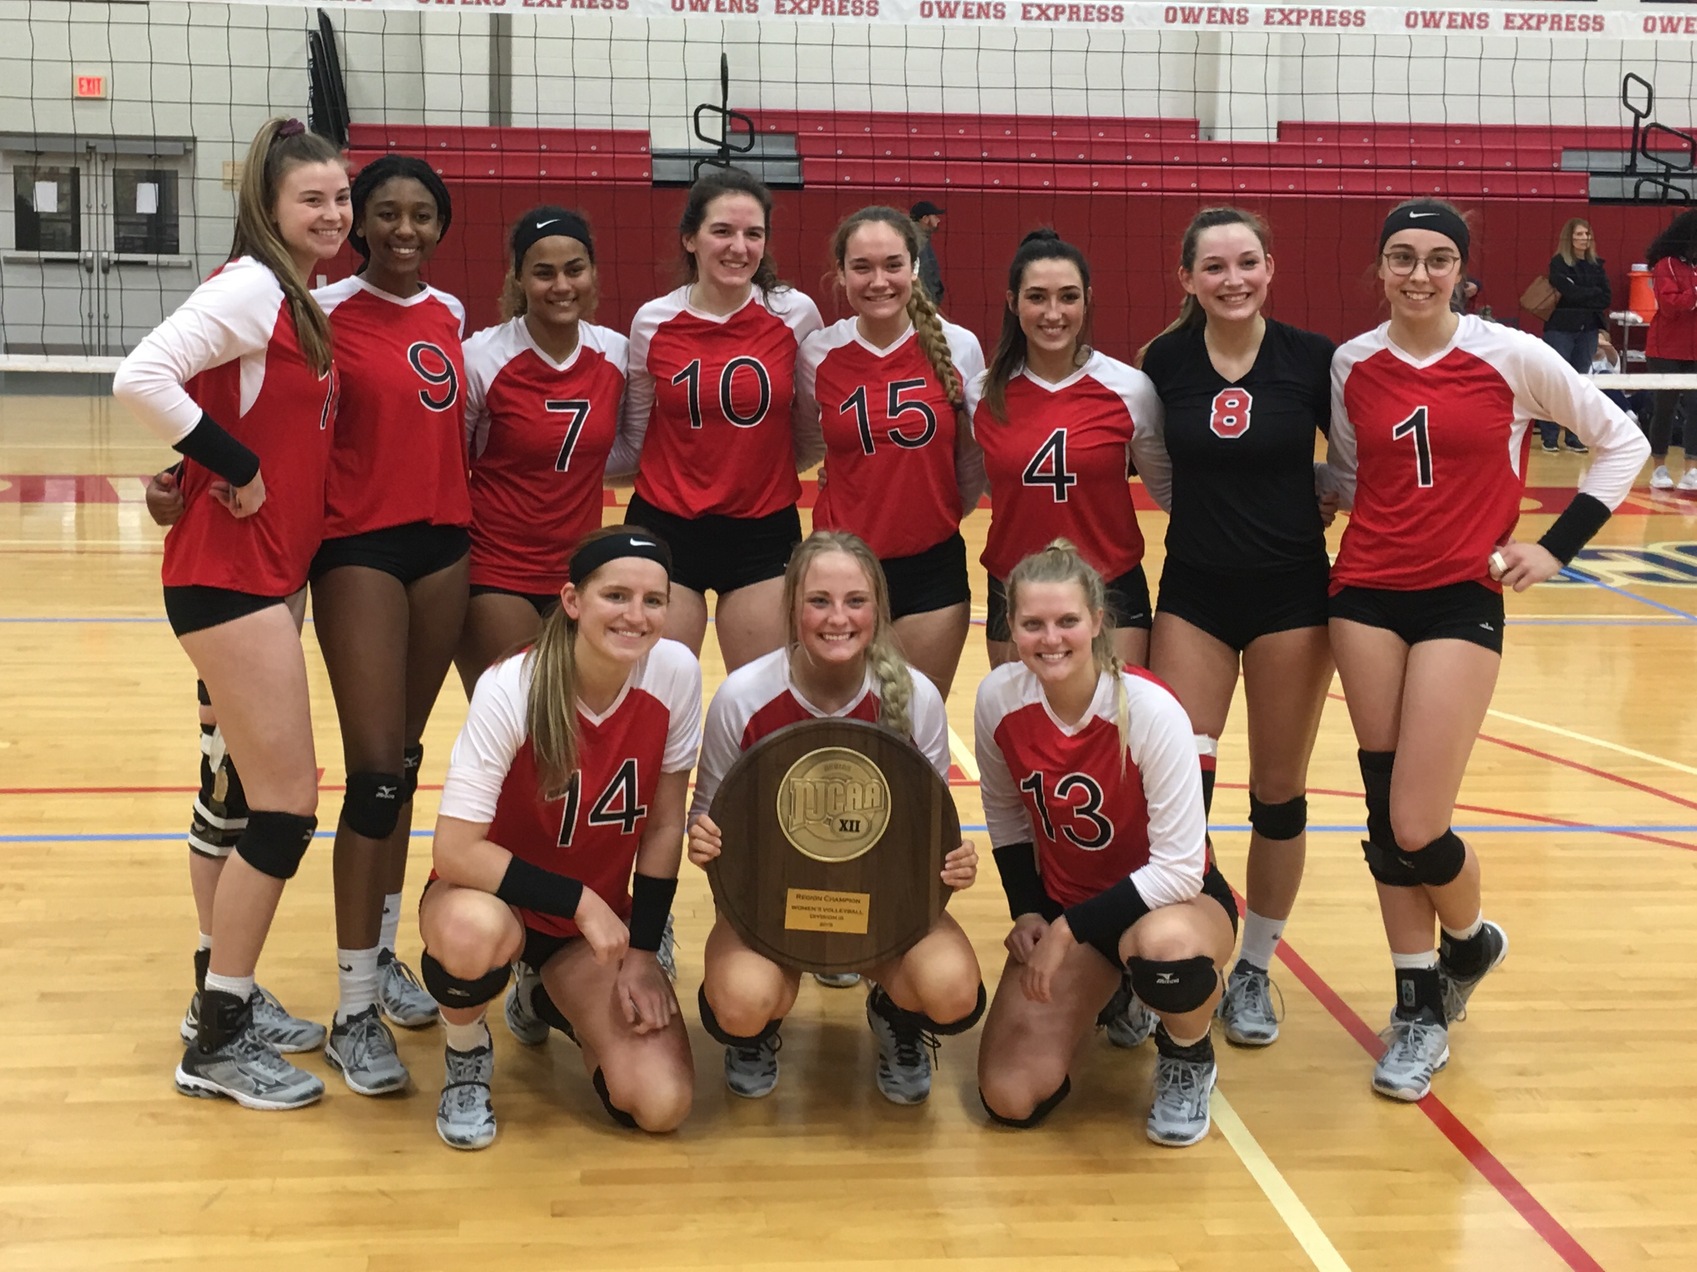 2019 NJCAA Region XII Division III Women's Volleyball Champions: Owens Community College Express